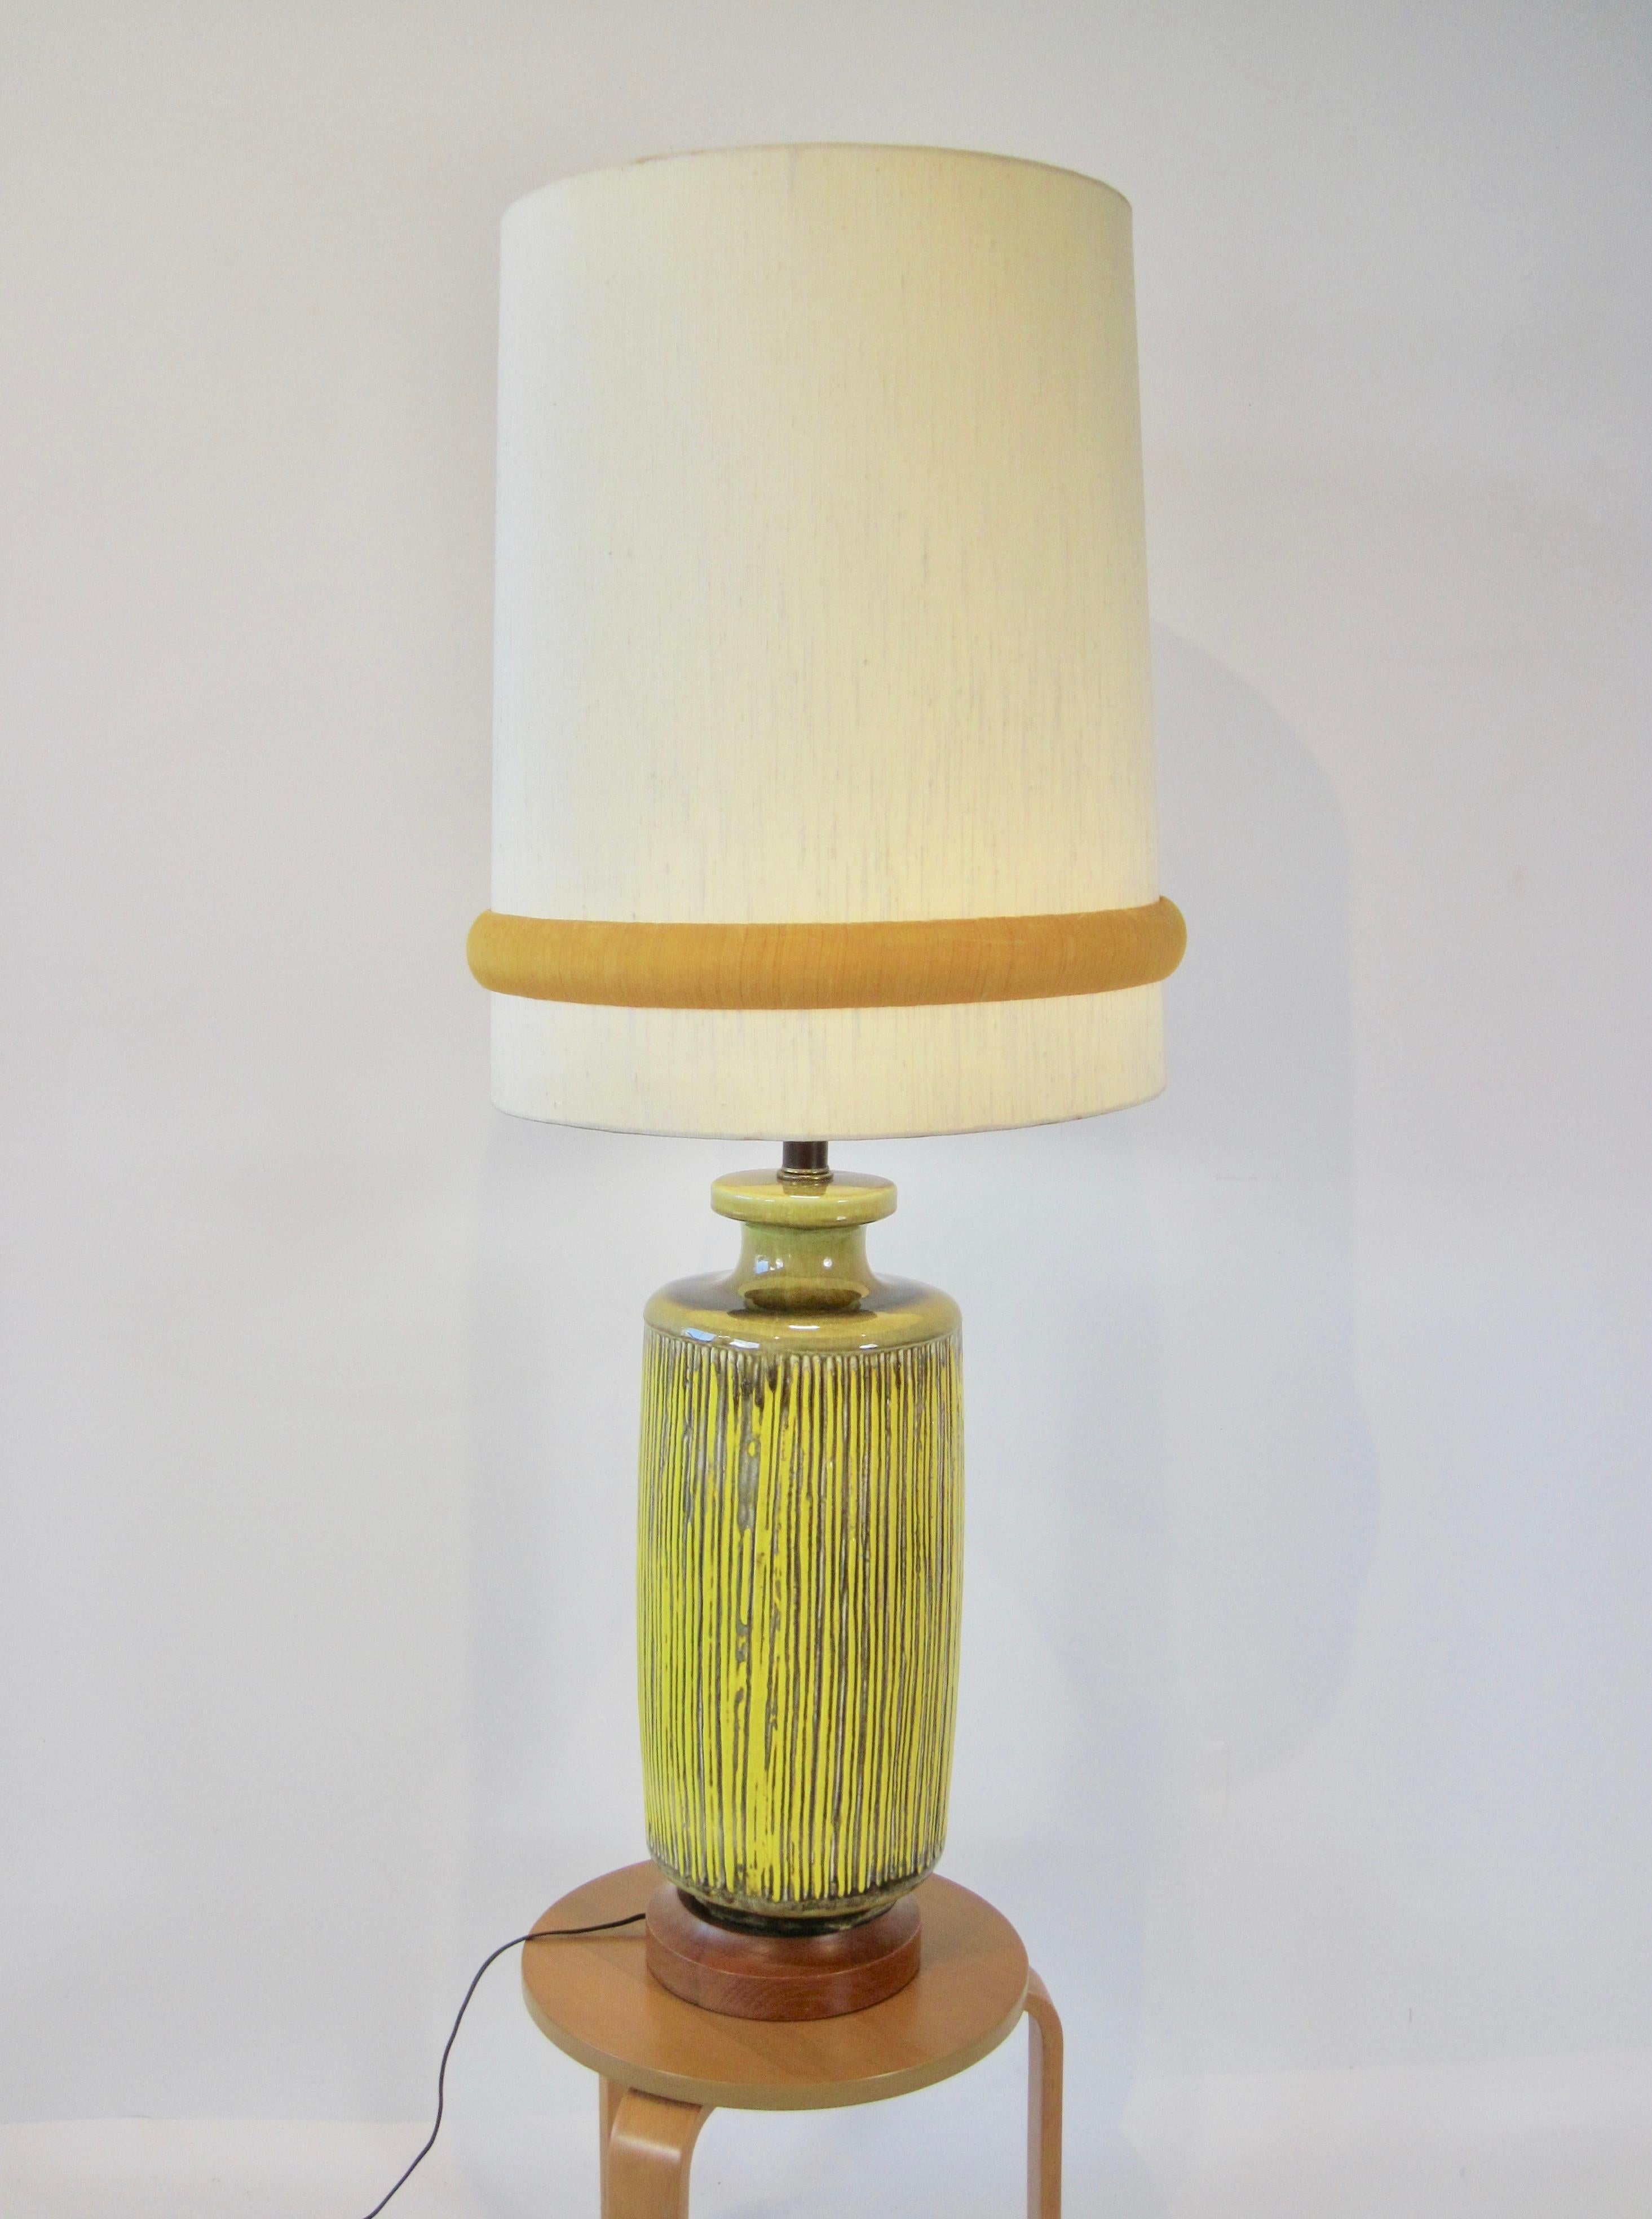 Reed style ceramic bottle neck lamp in yellow and olive with wood base, and monumental shade. 
Can be purchased without shade, lamp measurements are 9